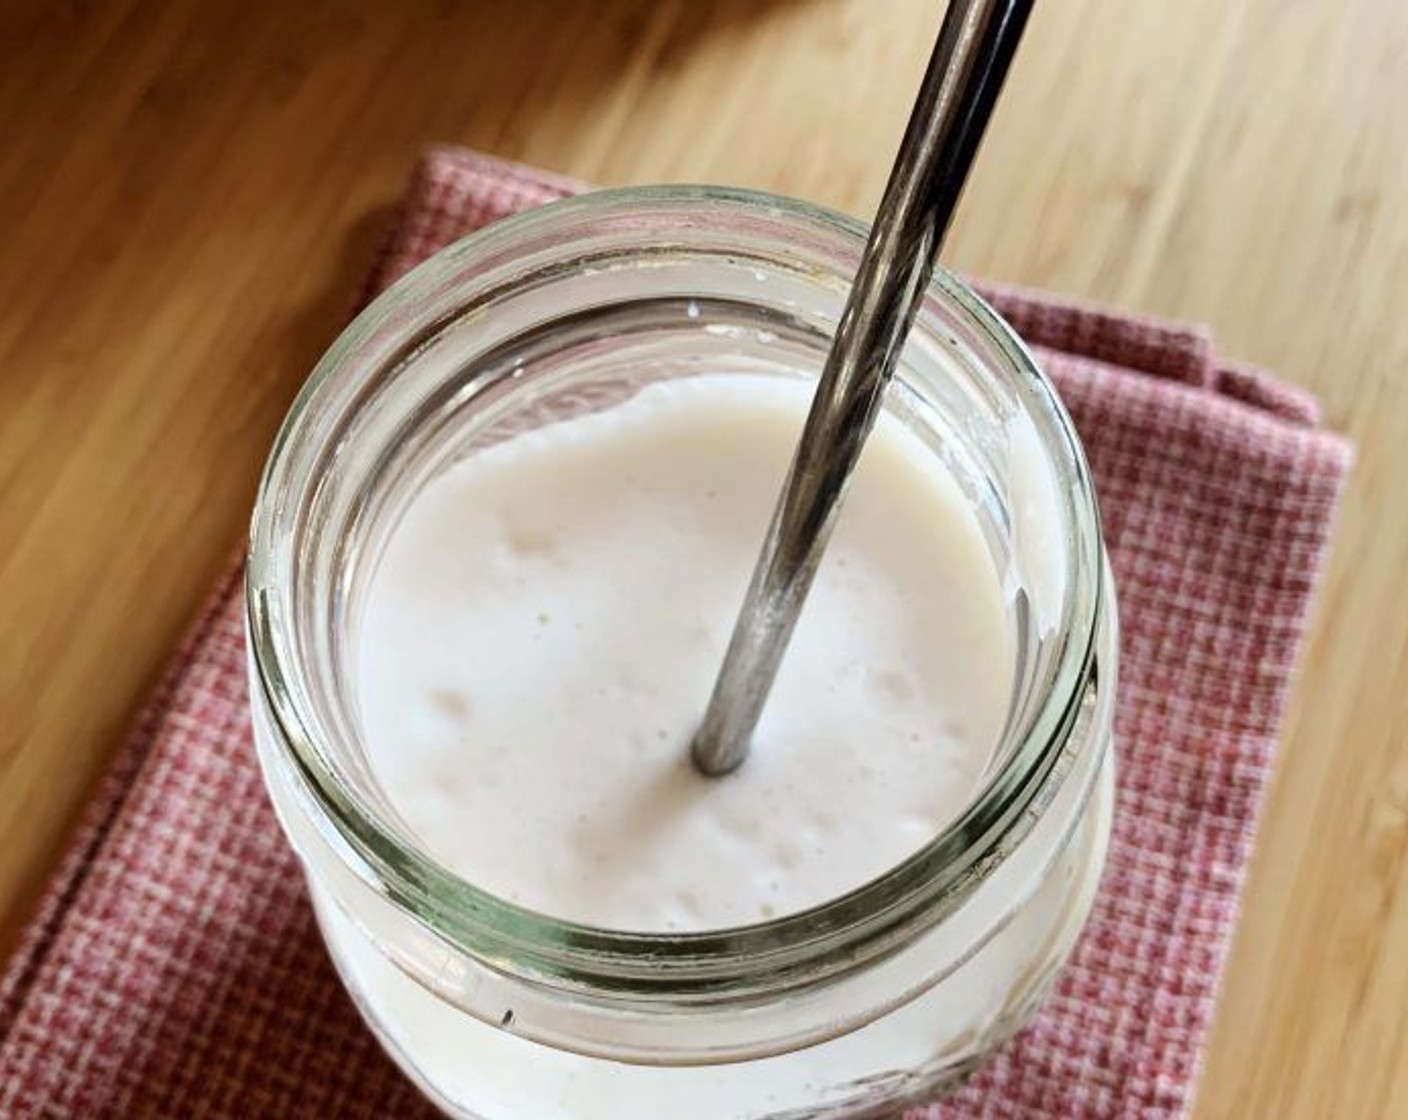 step 3 Strain the milk using a few layers of cheesecloth. Store in a jar and drink up, or add it to your coffee.